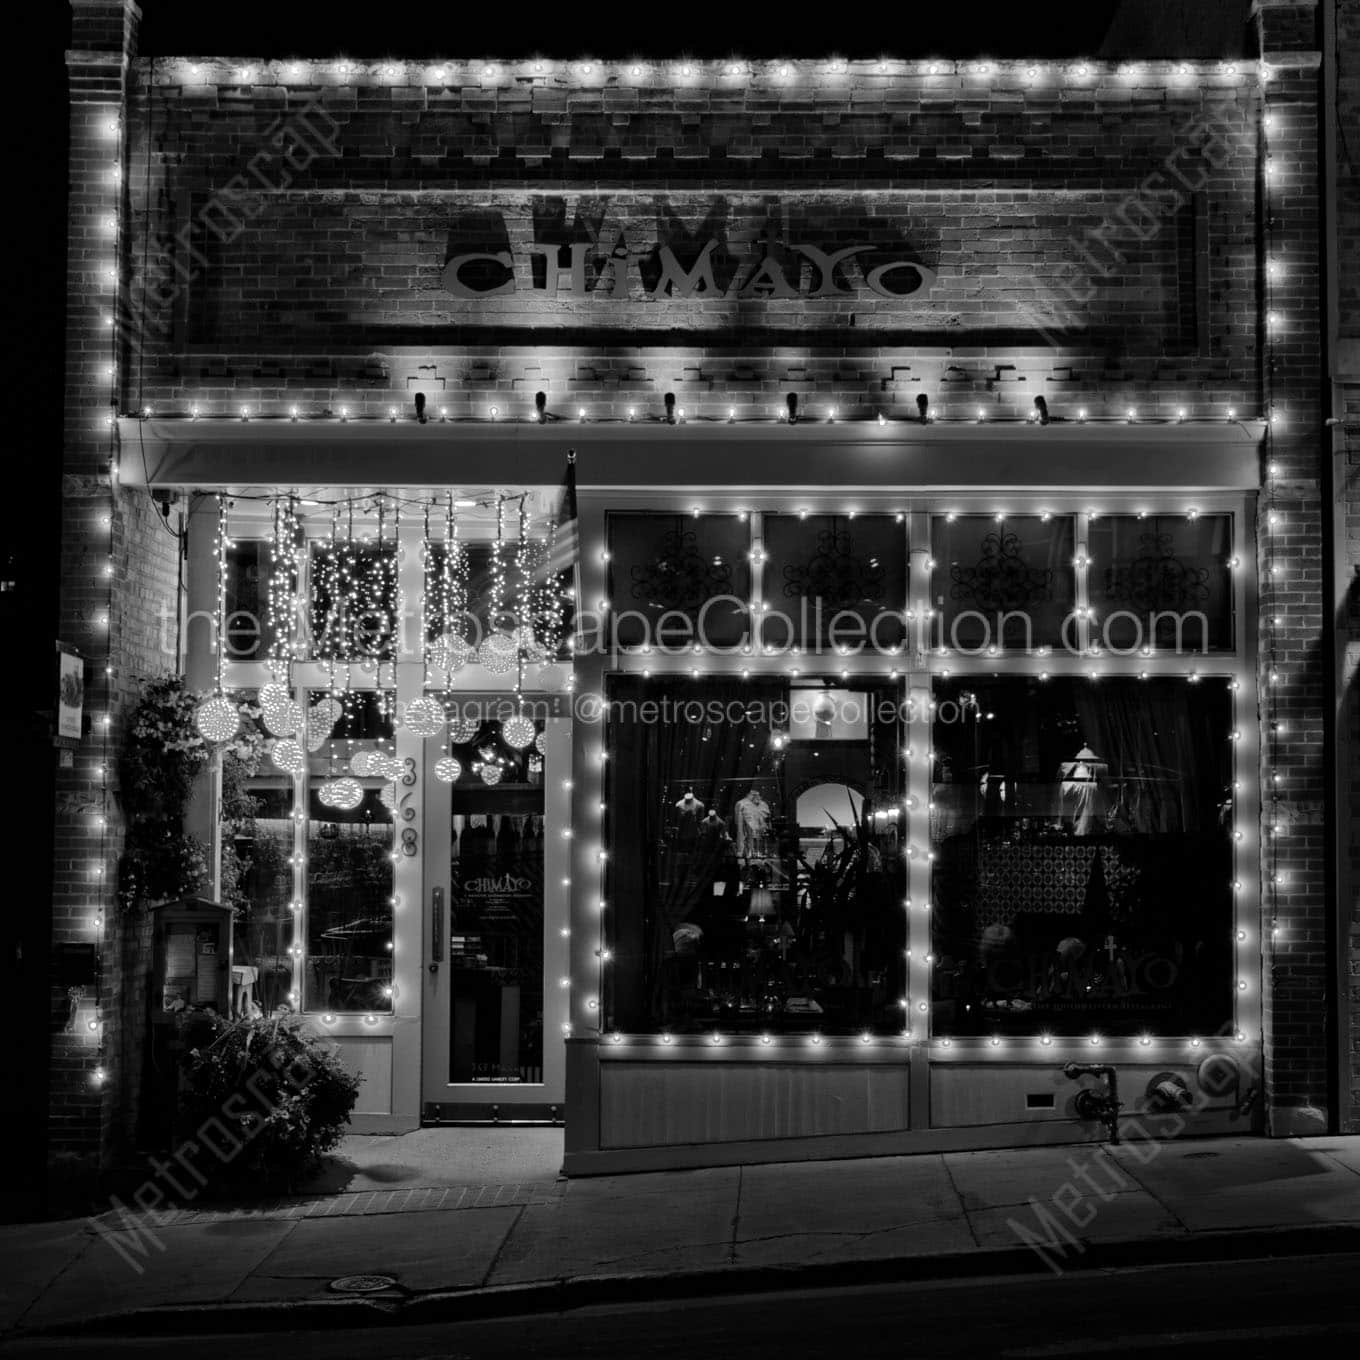 chimayo on main street in downtown park city Black & White Office Art